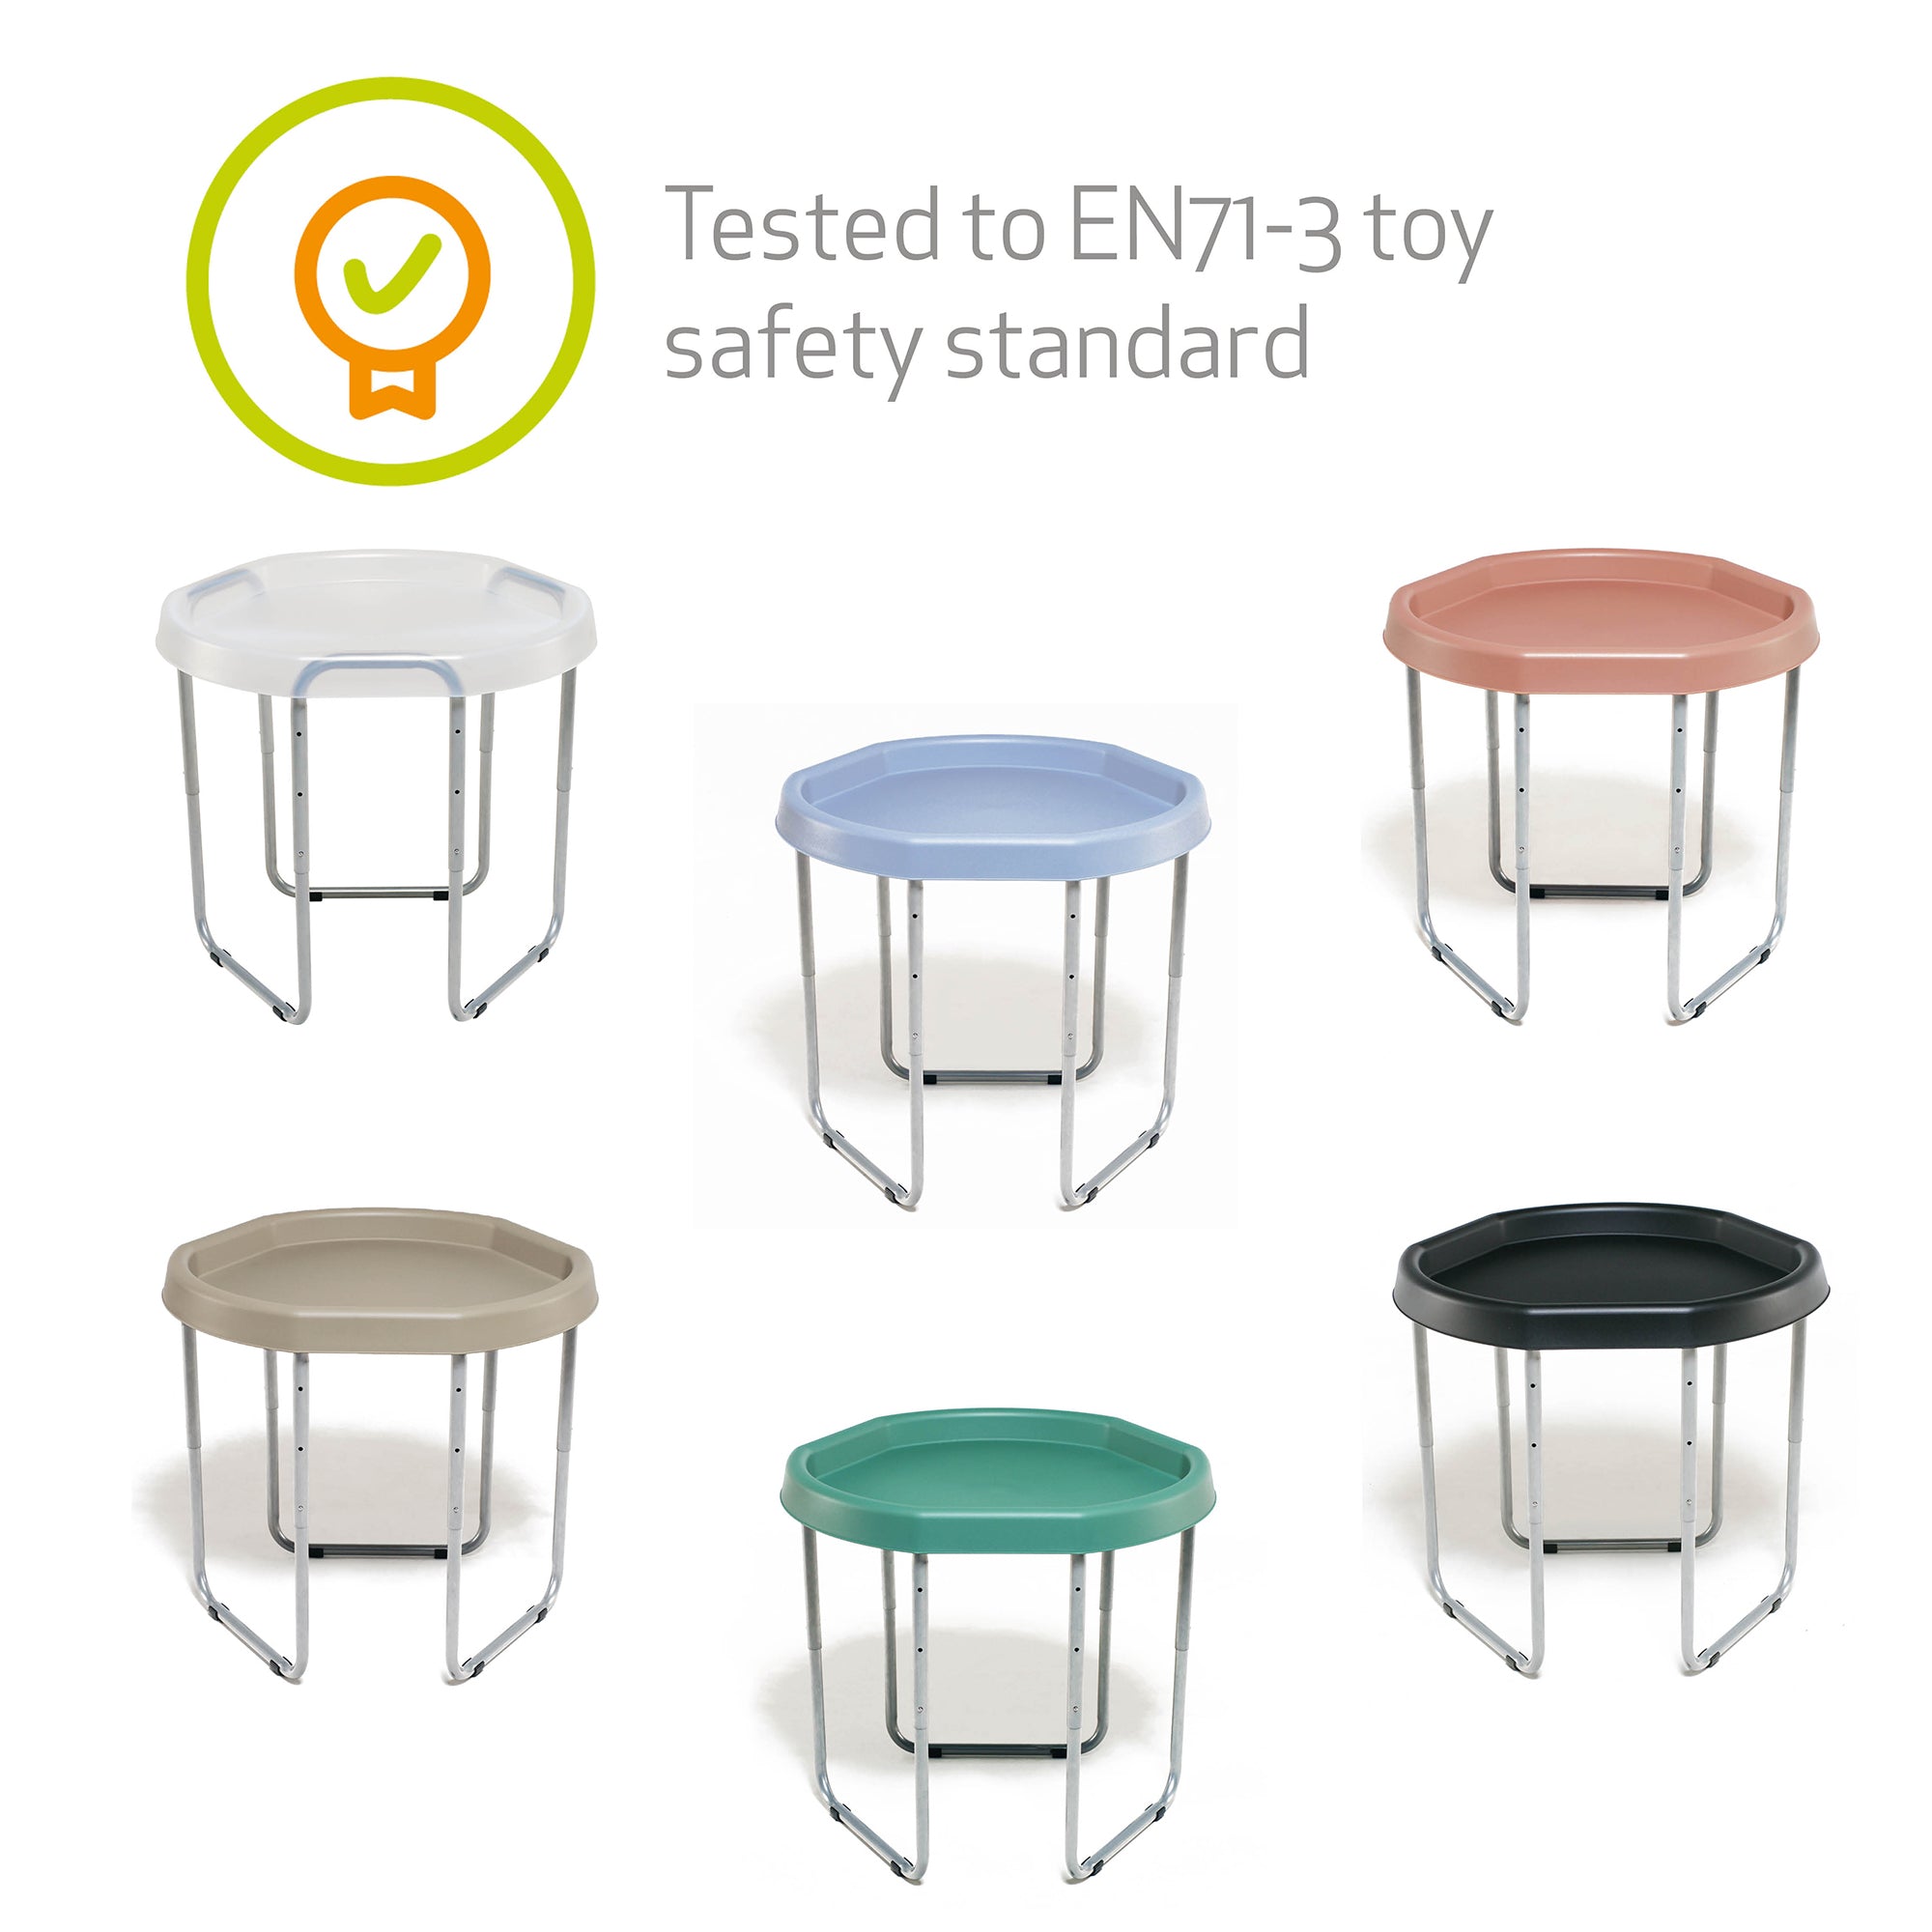 Original Hexacle Tuff Tray & Stand - 6 Colour Options